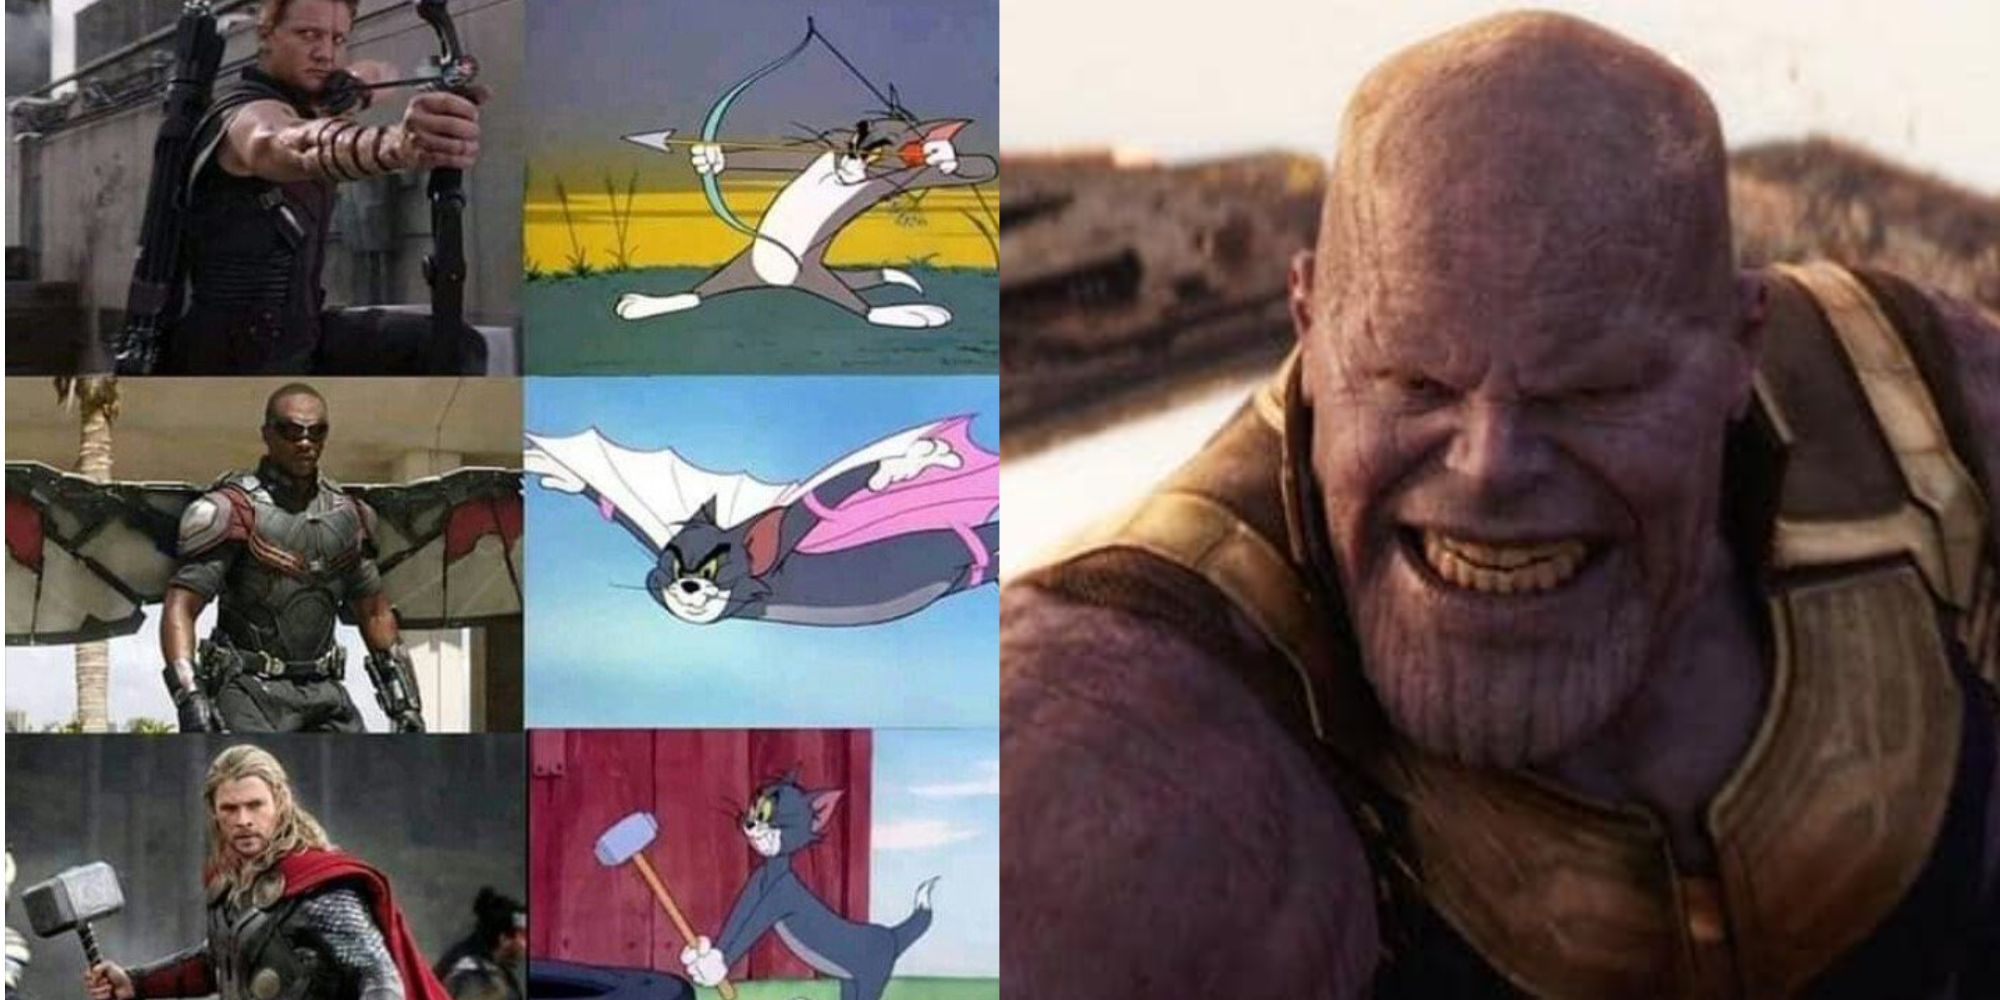 Split image of The Avengers as Tom from Tom and Jerry and Thanos in the MCU